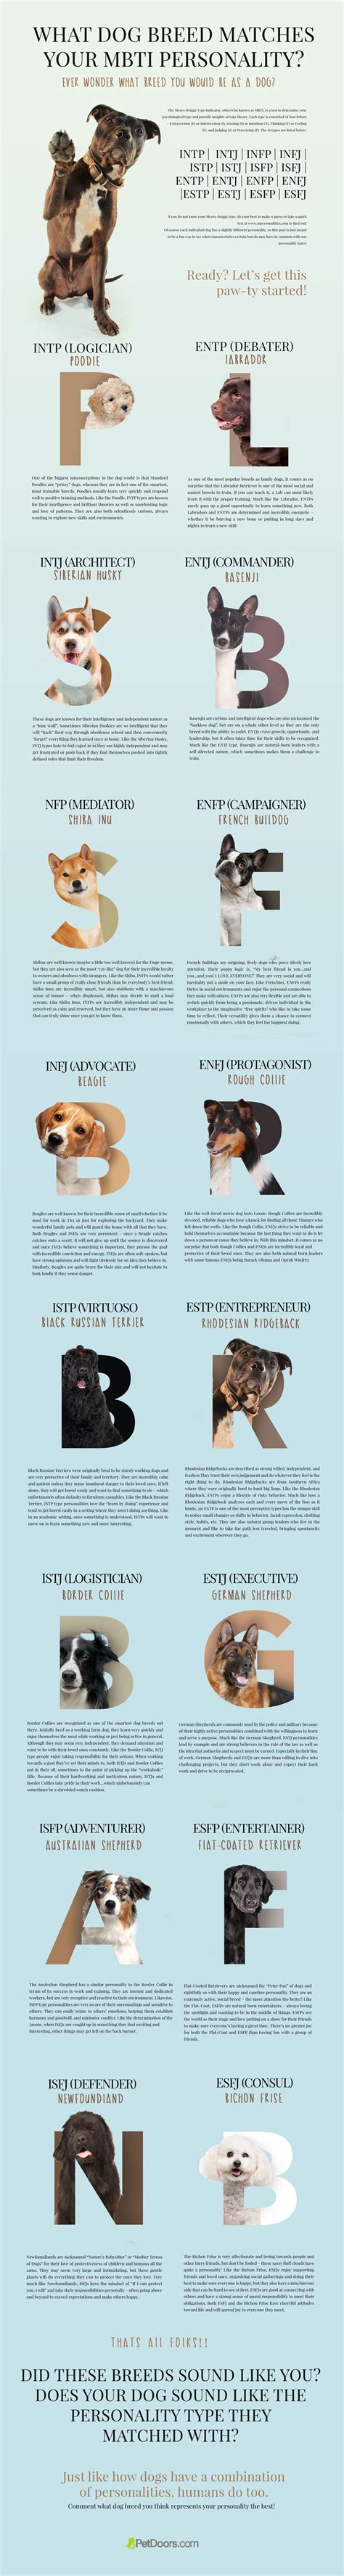 What Dog Breed Matches Your Mbti Personality Infographic